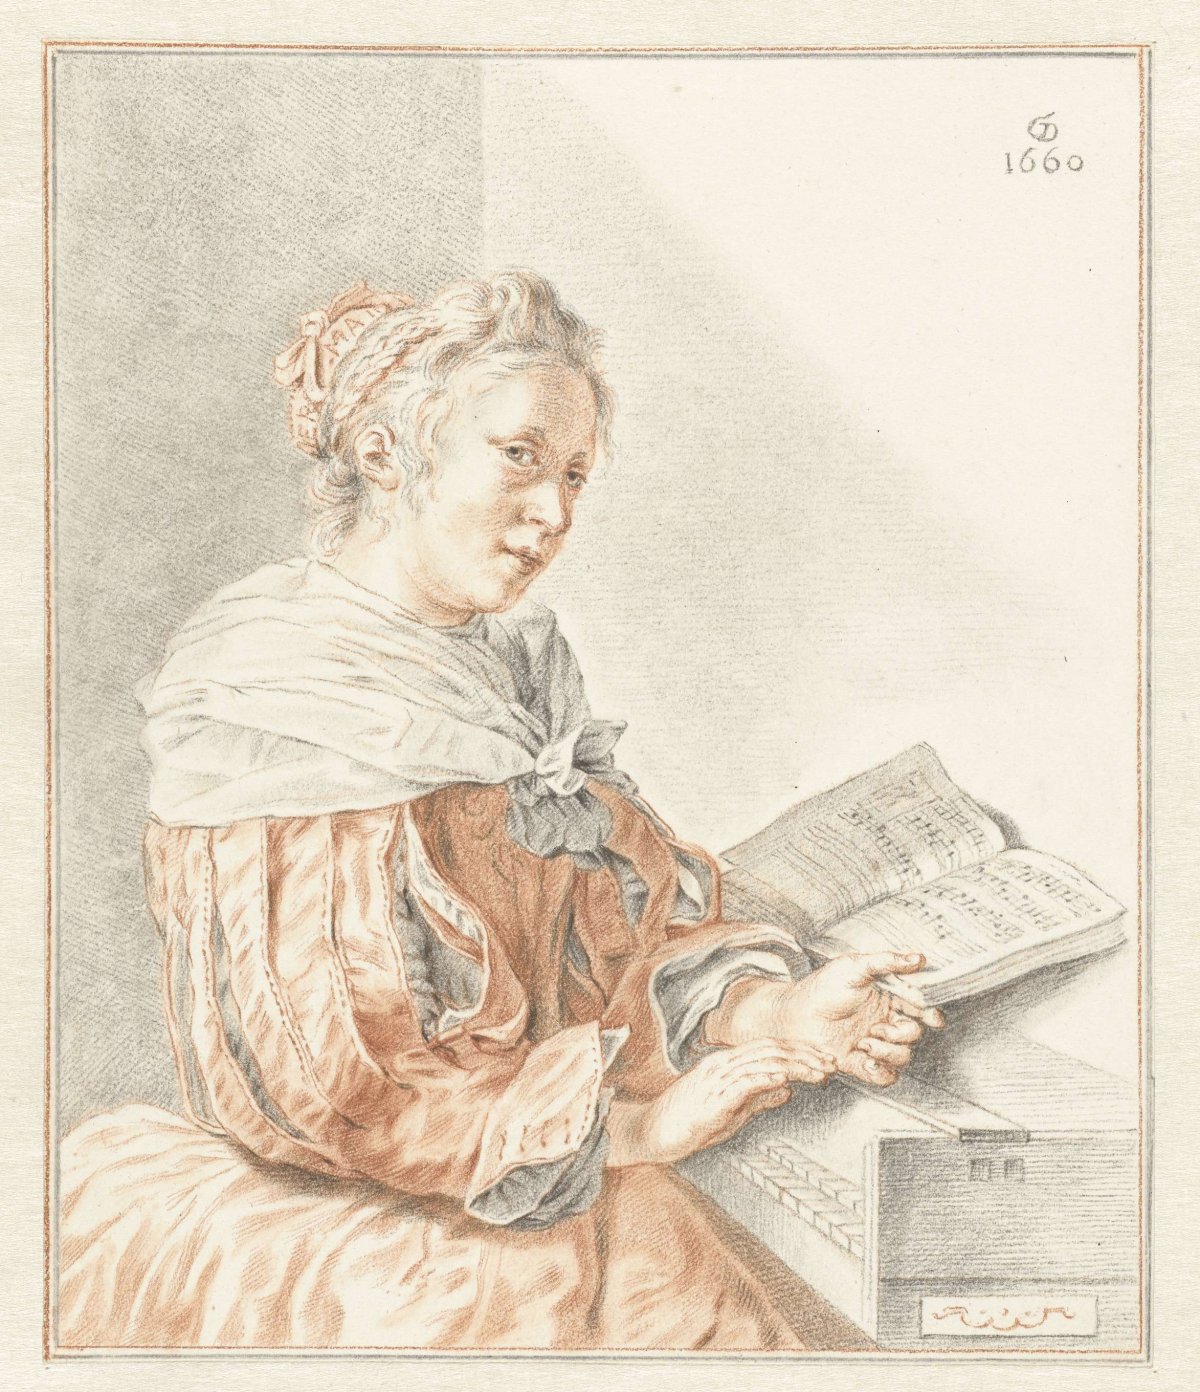 Lady at spinet, Abraham Delfos, 1798